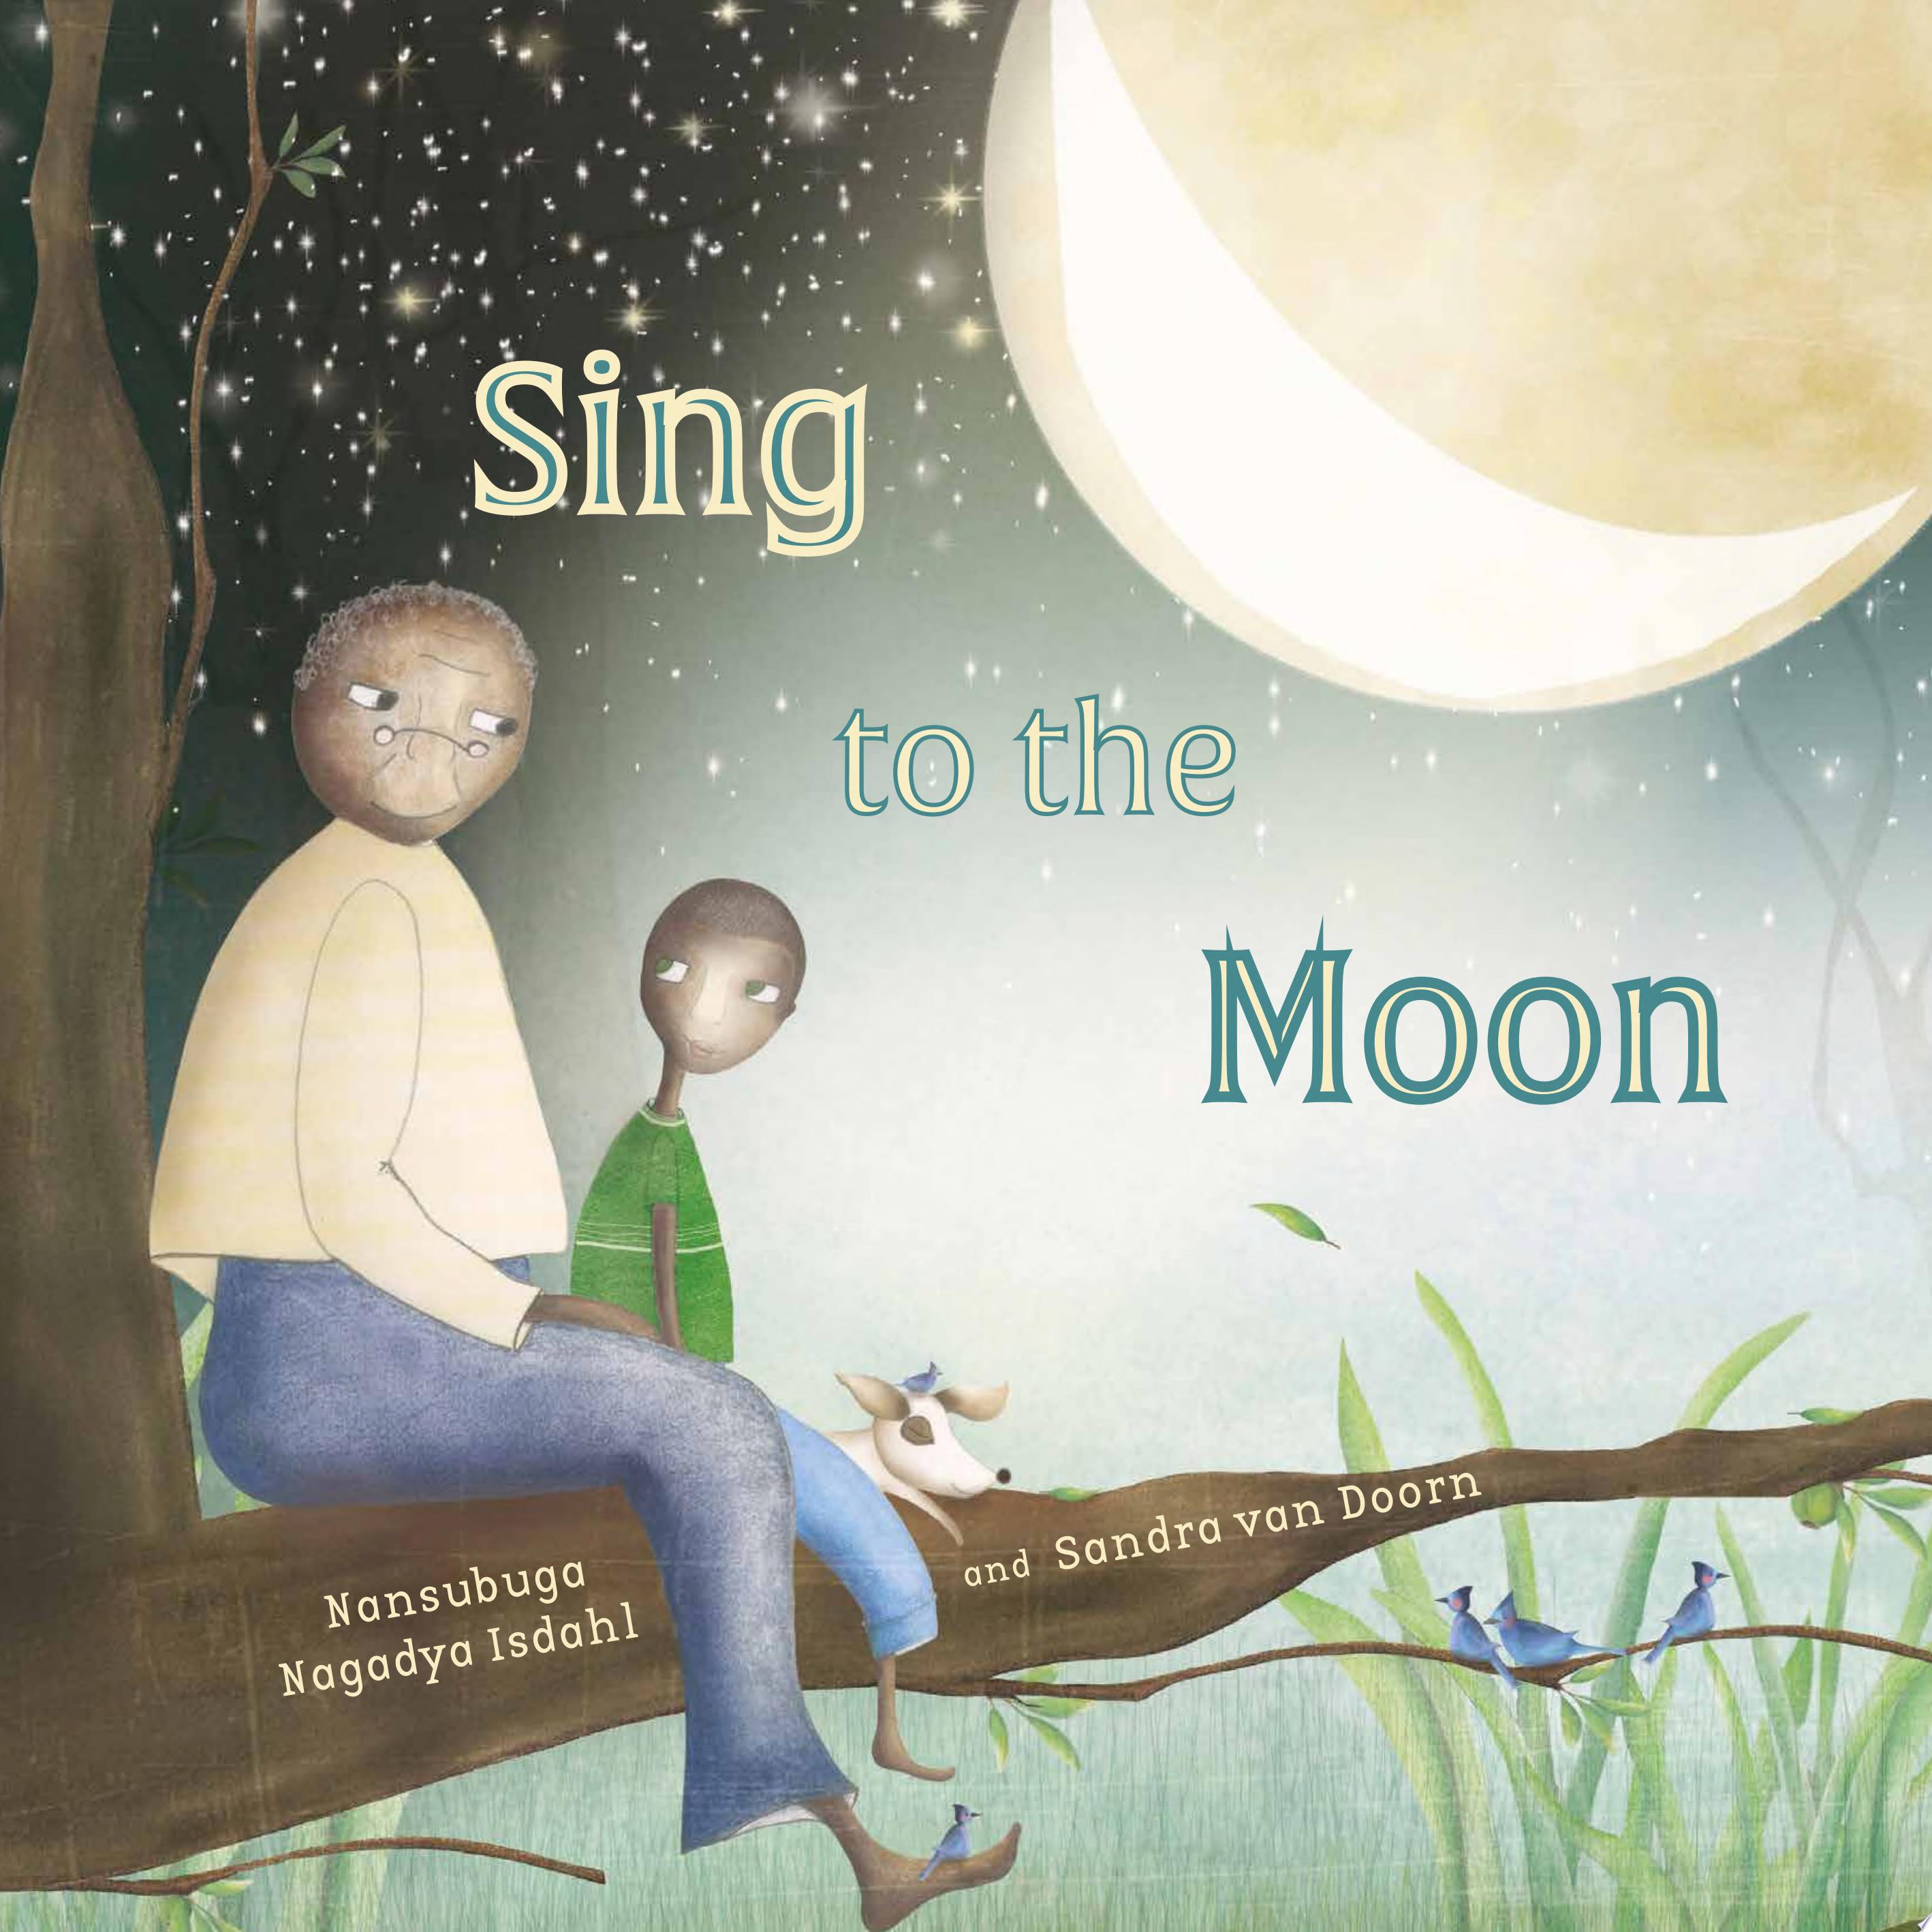 Image for "Sing to the Moon"